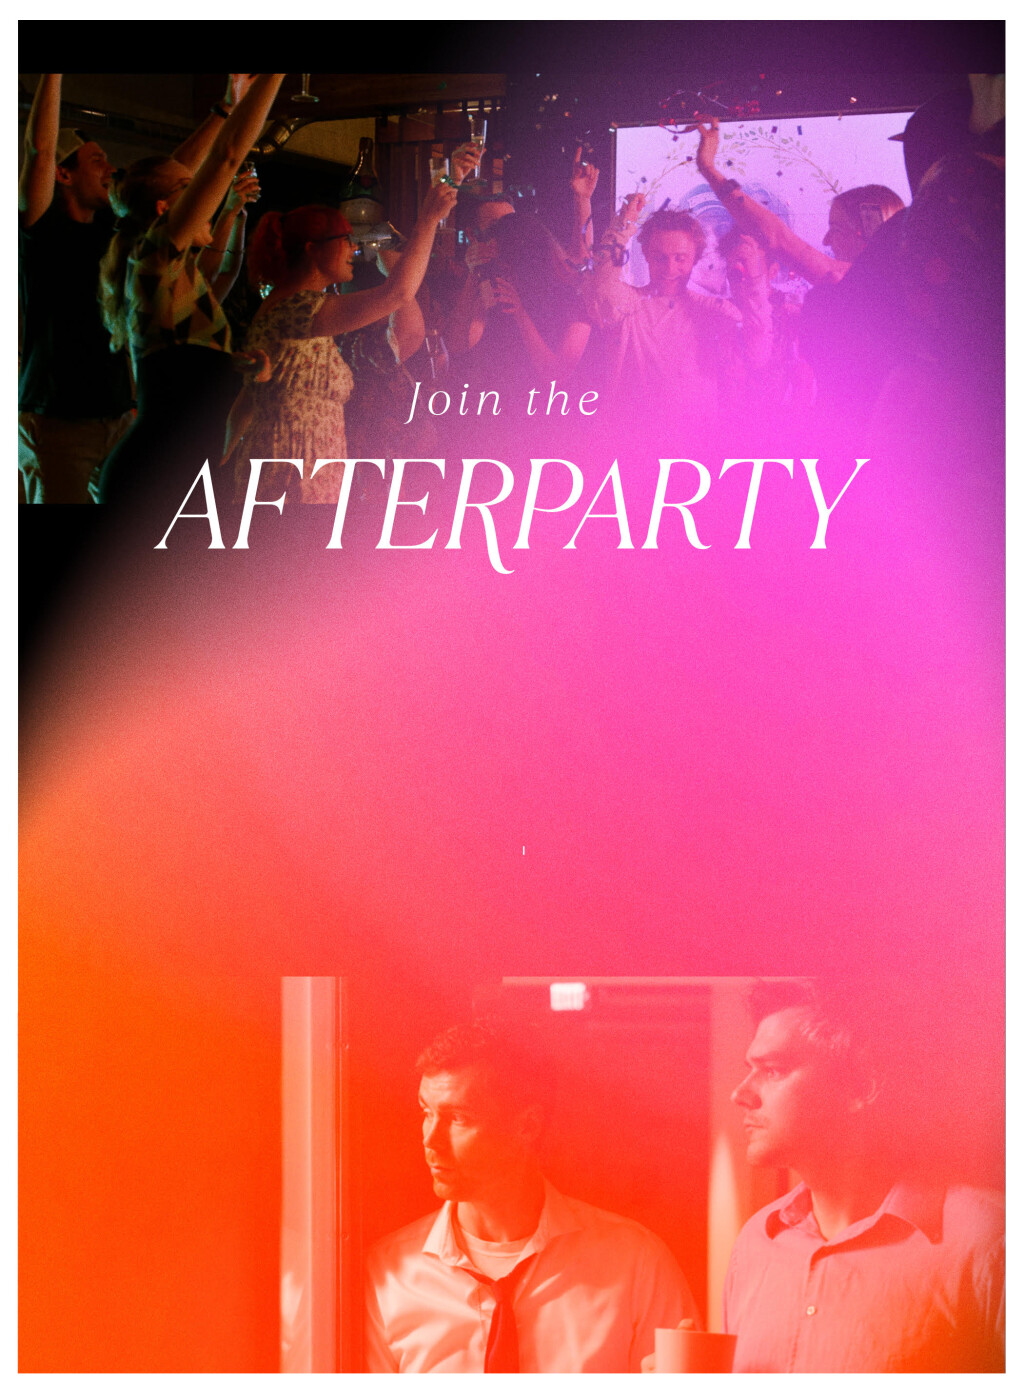 Filmposter for Afterparty